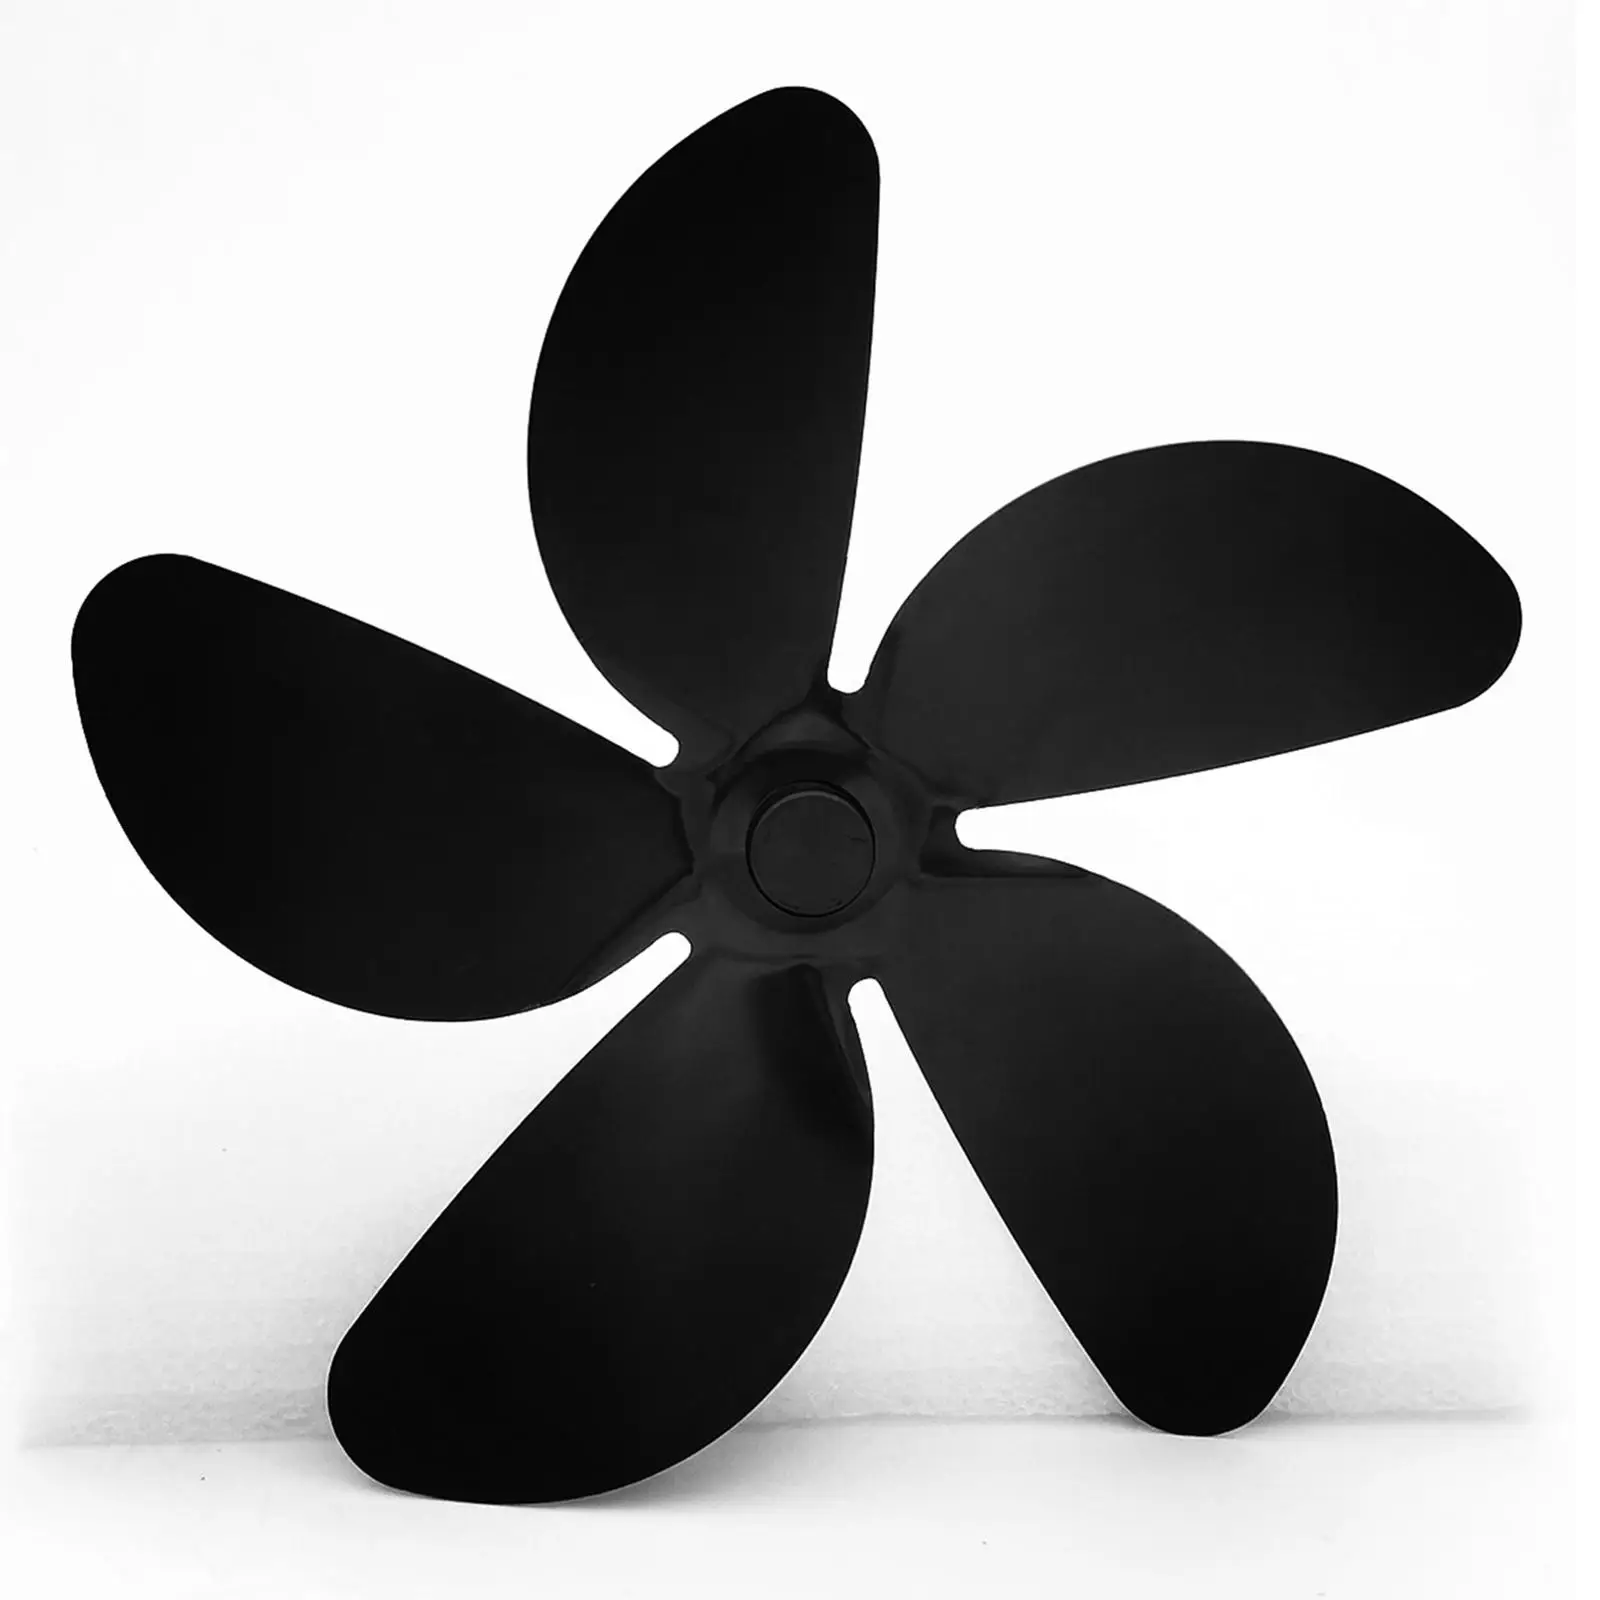 Stove Fan Blade Replacement Heat Powered Warm Fan Accessories Parts Quiet for Fireplace Distribution Indoor Warm Air